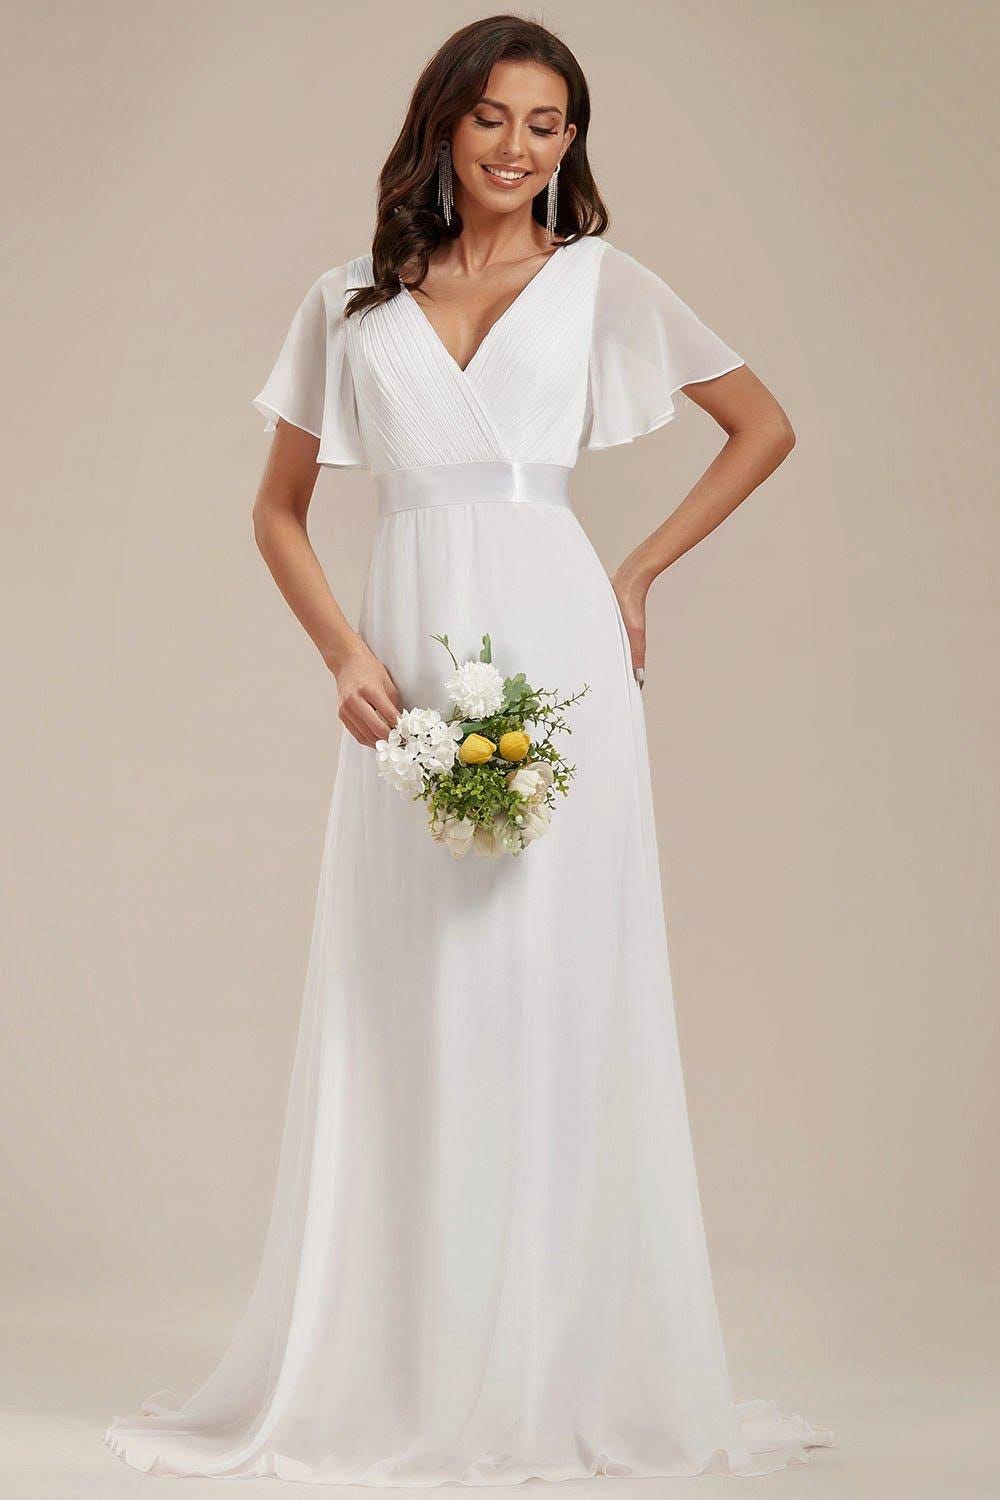 Elegant Chiffon Mother of the Bride Dress in White | Image